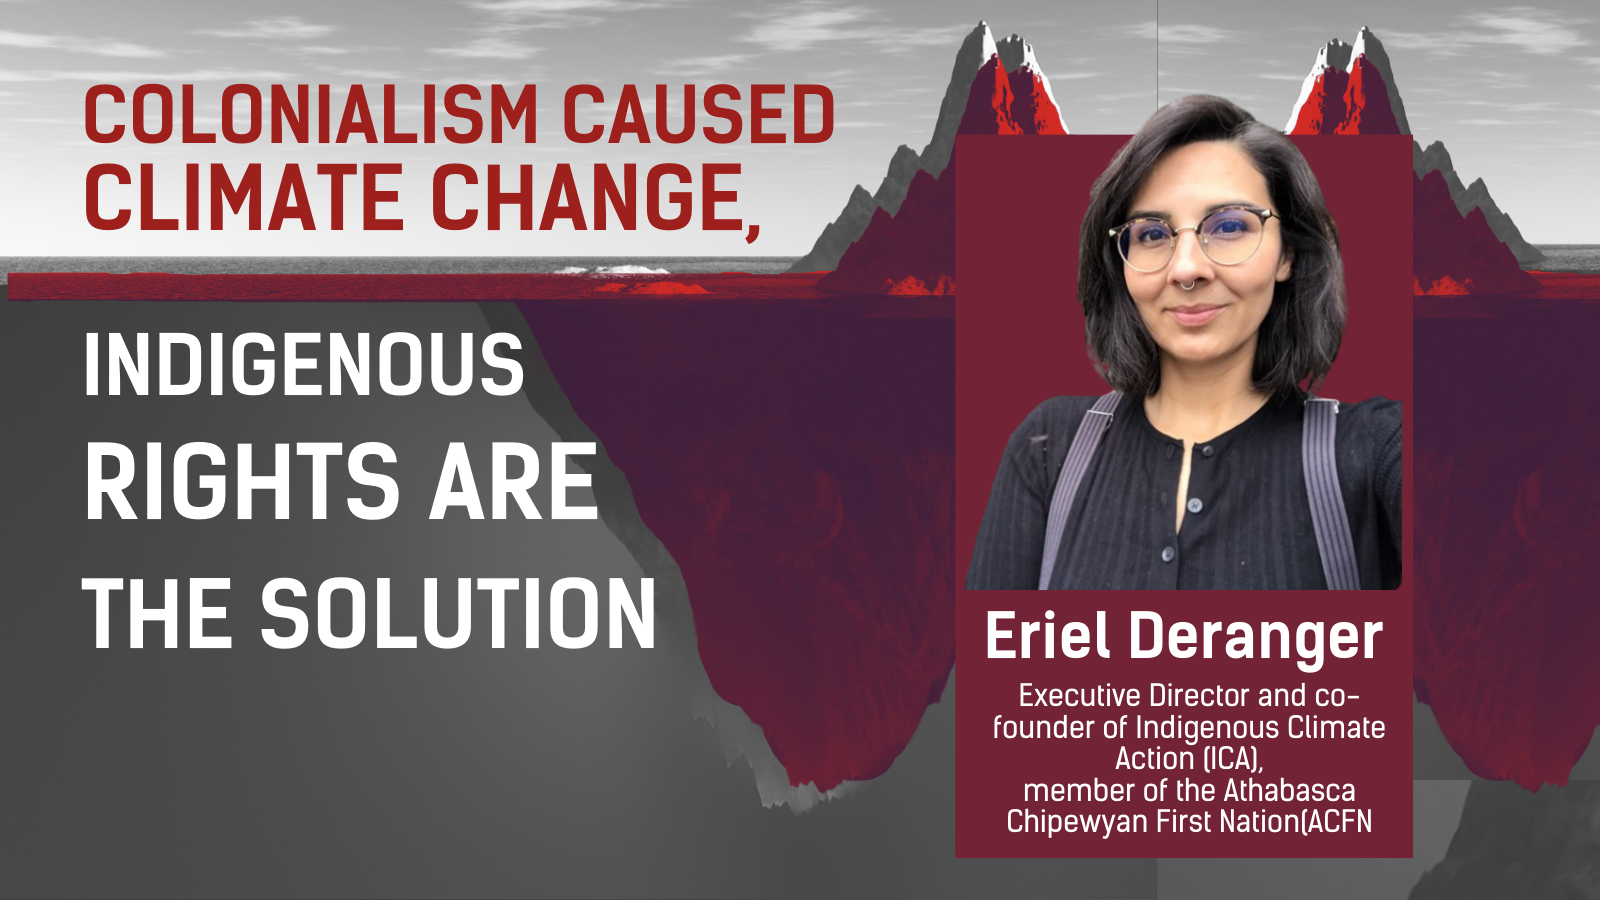 A banner with the title "Colonialism caused climate change, Indigenous rights are the solution" alongside a headshot of a white woman with glasses